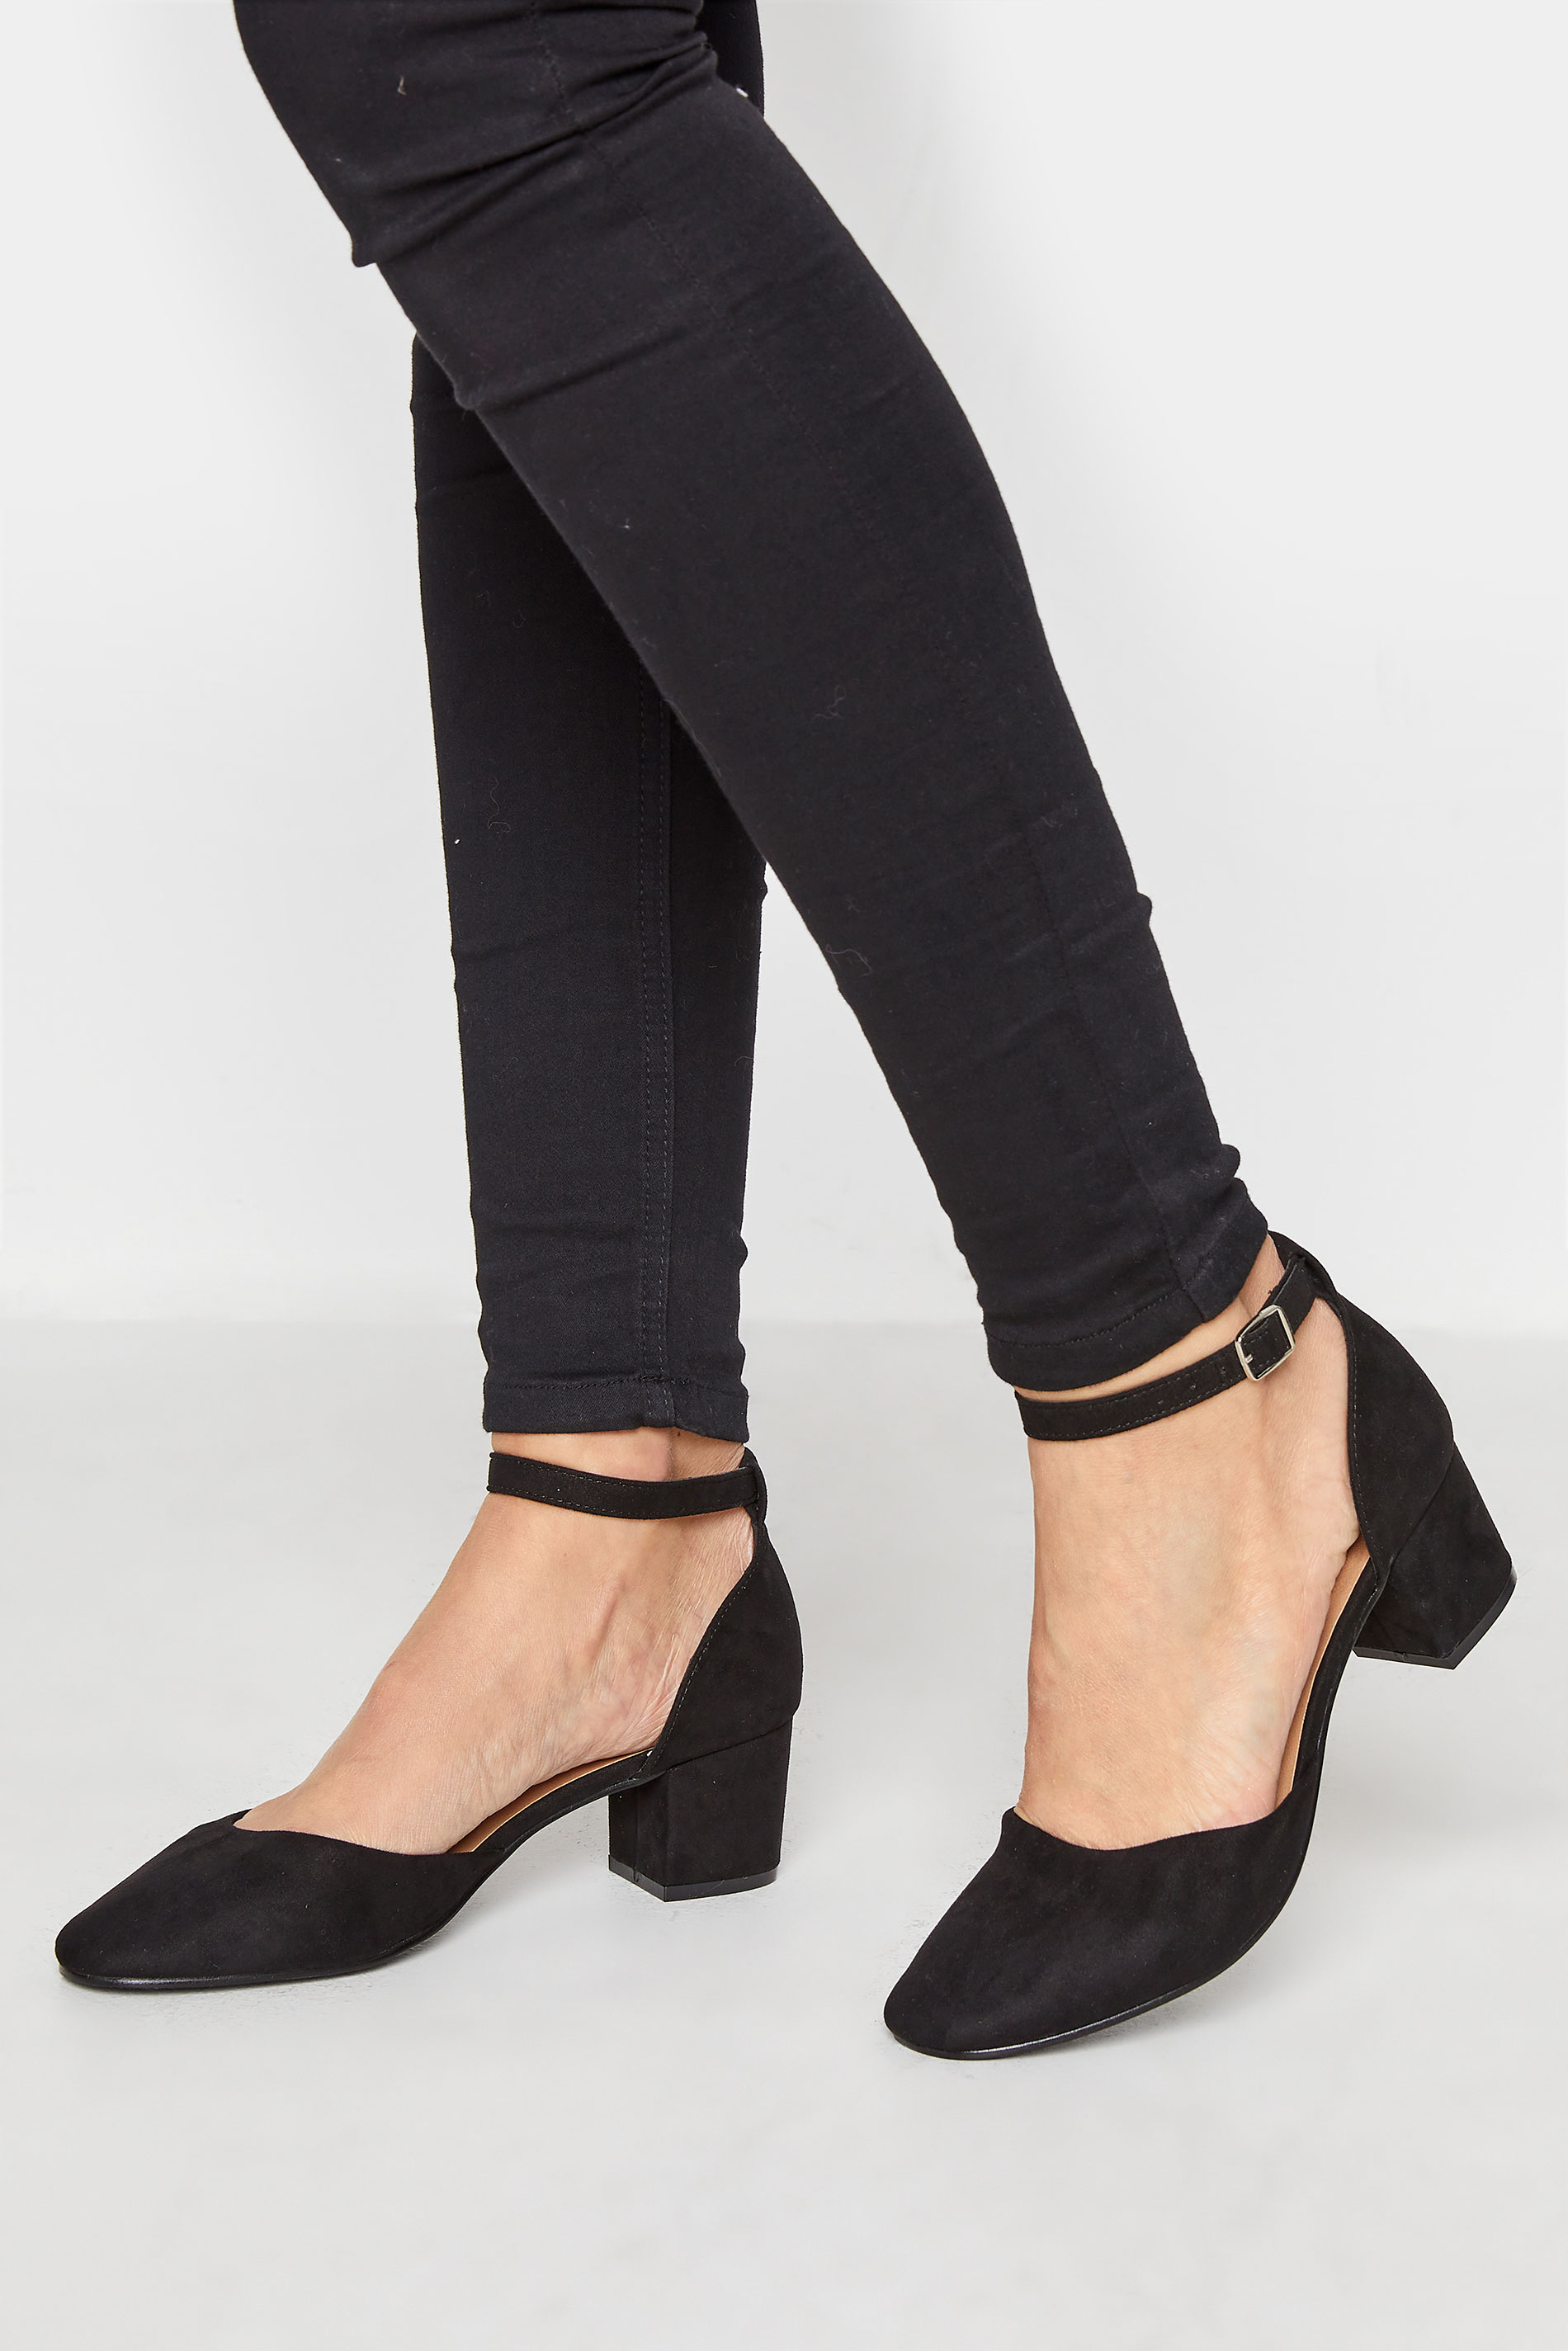 LTS Black Block Heel Court Shoes In Standard Fit | Long Tall Sally 1